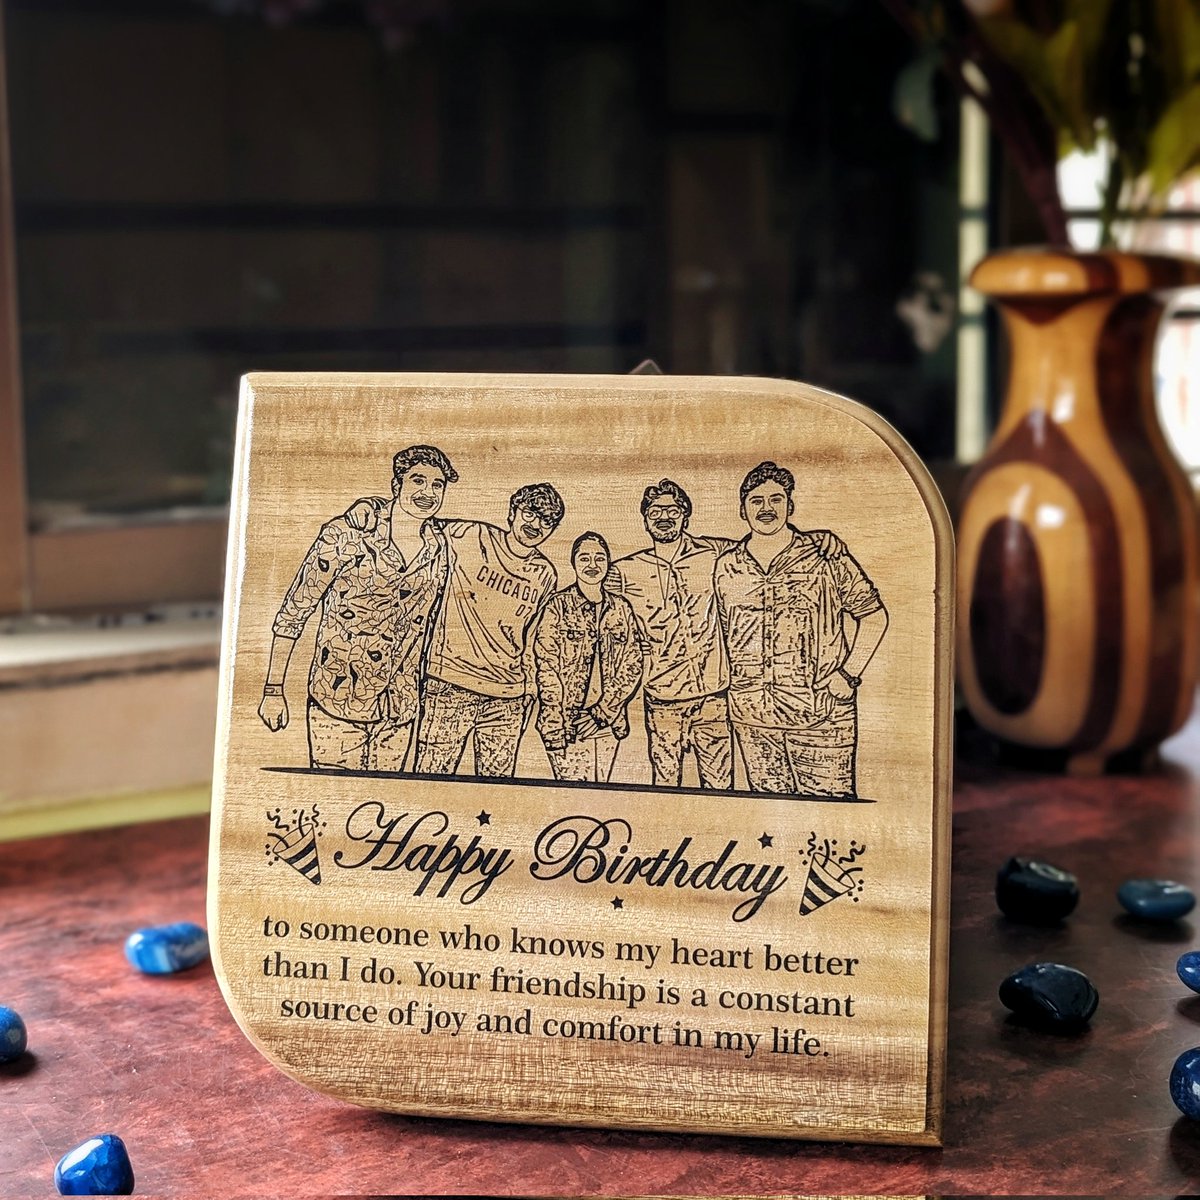 Celebrate the laughter, the tears, and all the years with a personalized gift that speaks volumes! This engraved wooden plaque lets you add your favorite photo and a heartfelt message for your bestie's birthday. #bestiesbirthday #personalizedgift #friendshipgoals #woodgeek